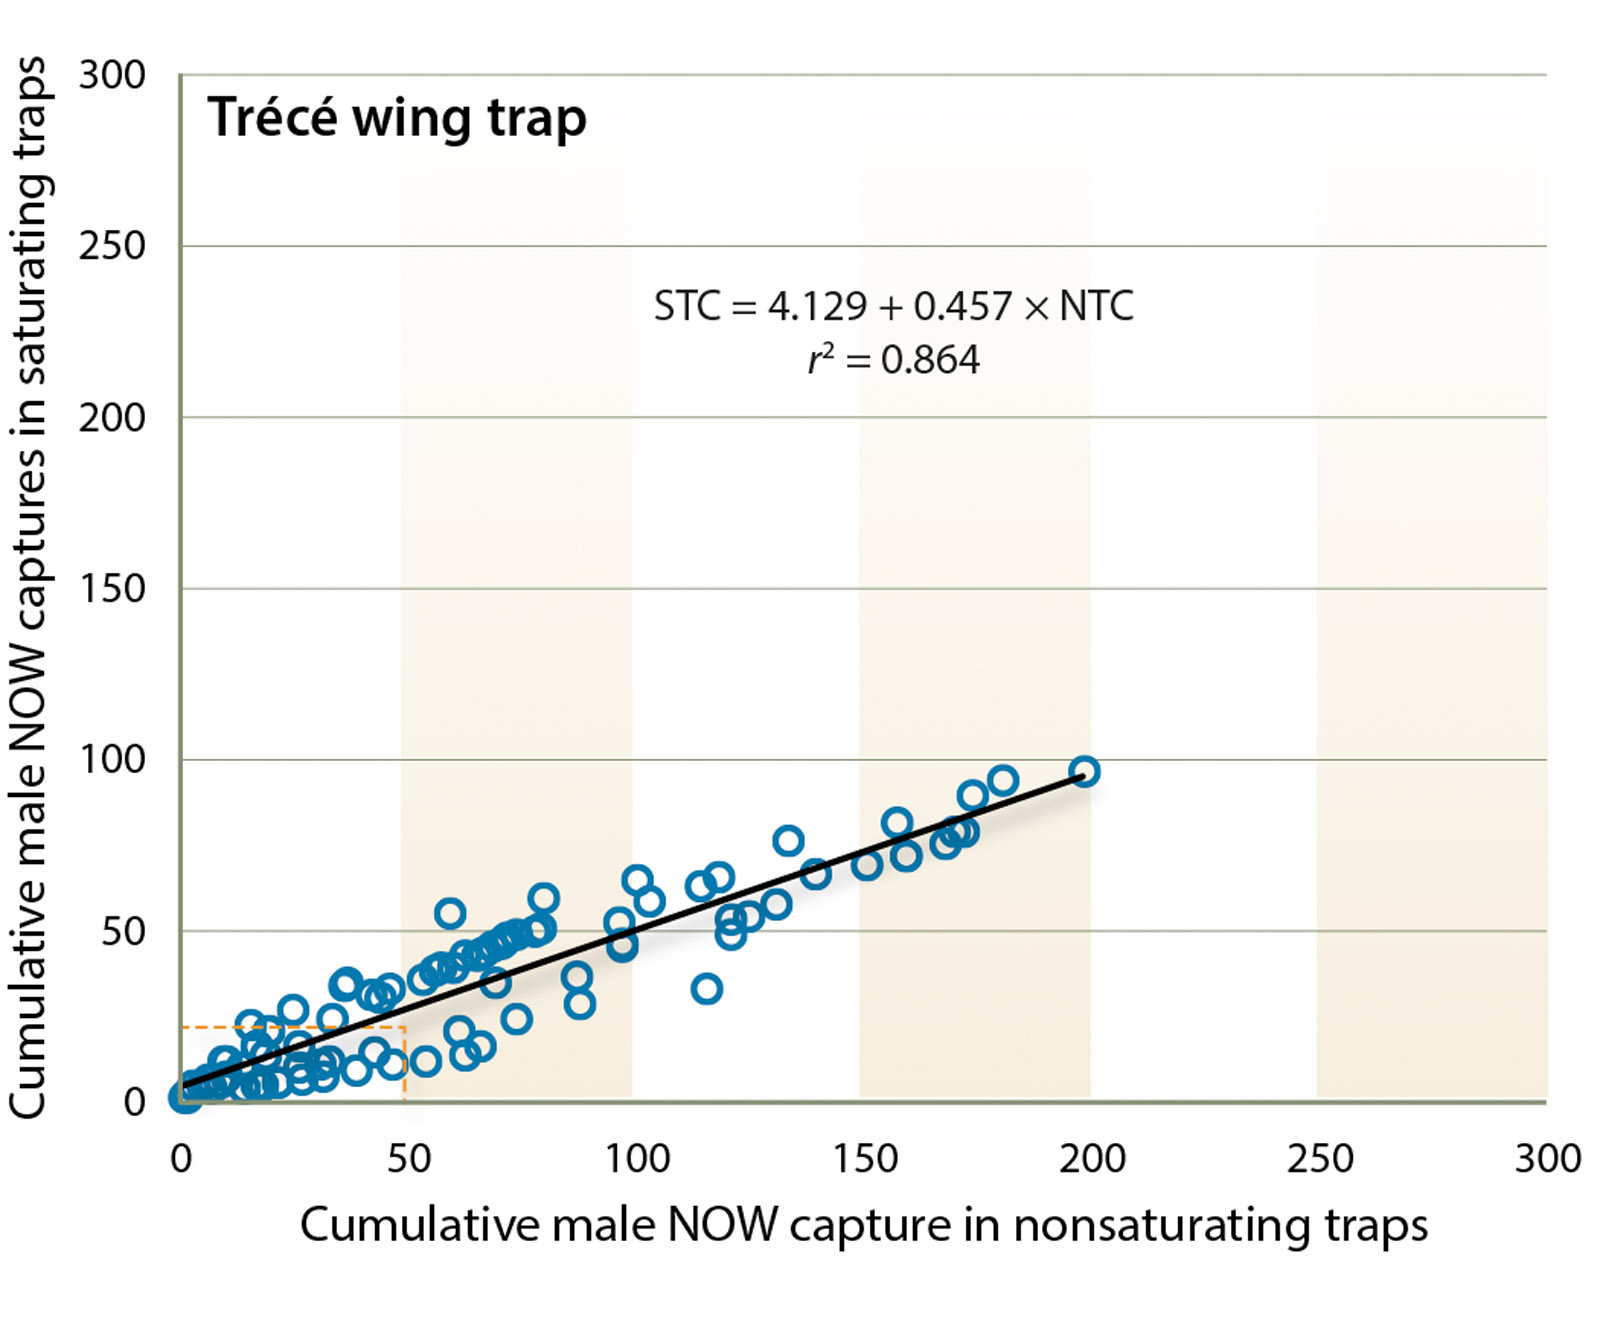 Trécé wing trap. Plot of mean number of moths captured in saturating and nonsaturating traps (n = 5 tests). The relationship is linear and described by Saturating trap count = 4.129 + 0.457 × Nonsaturating trap count, r2 = 0.86. Dashed vertical and horizontal lines are guides to note deviation of saturating trap counts from nonsaturating trap counts.